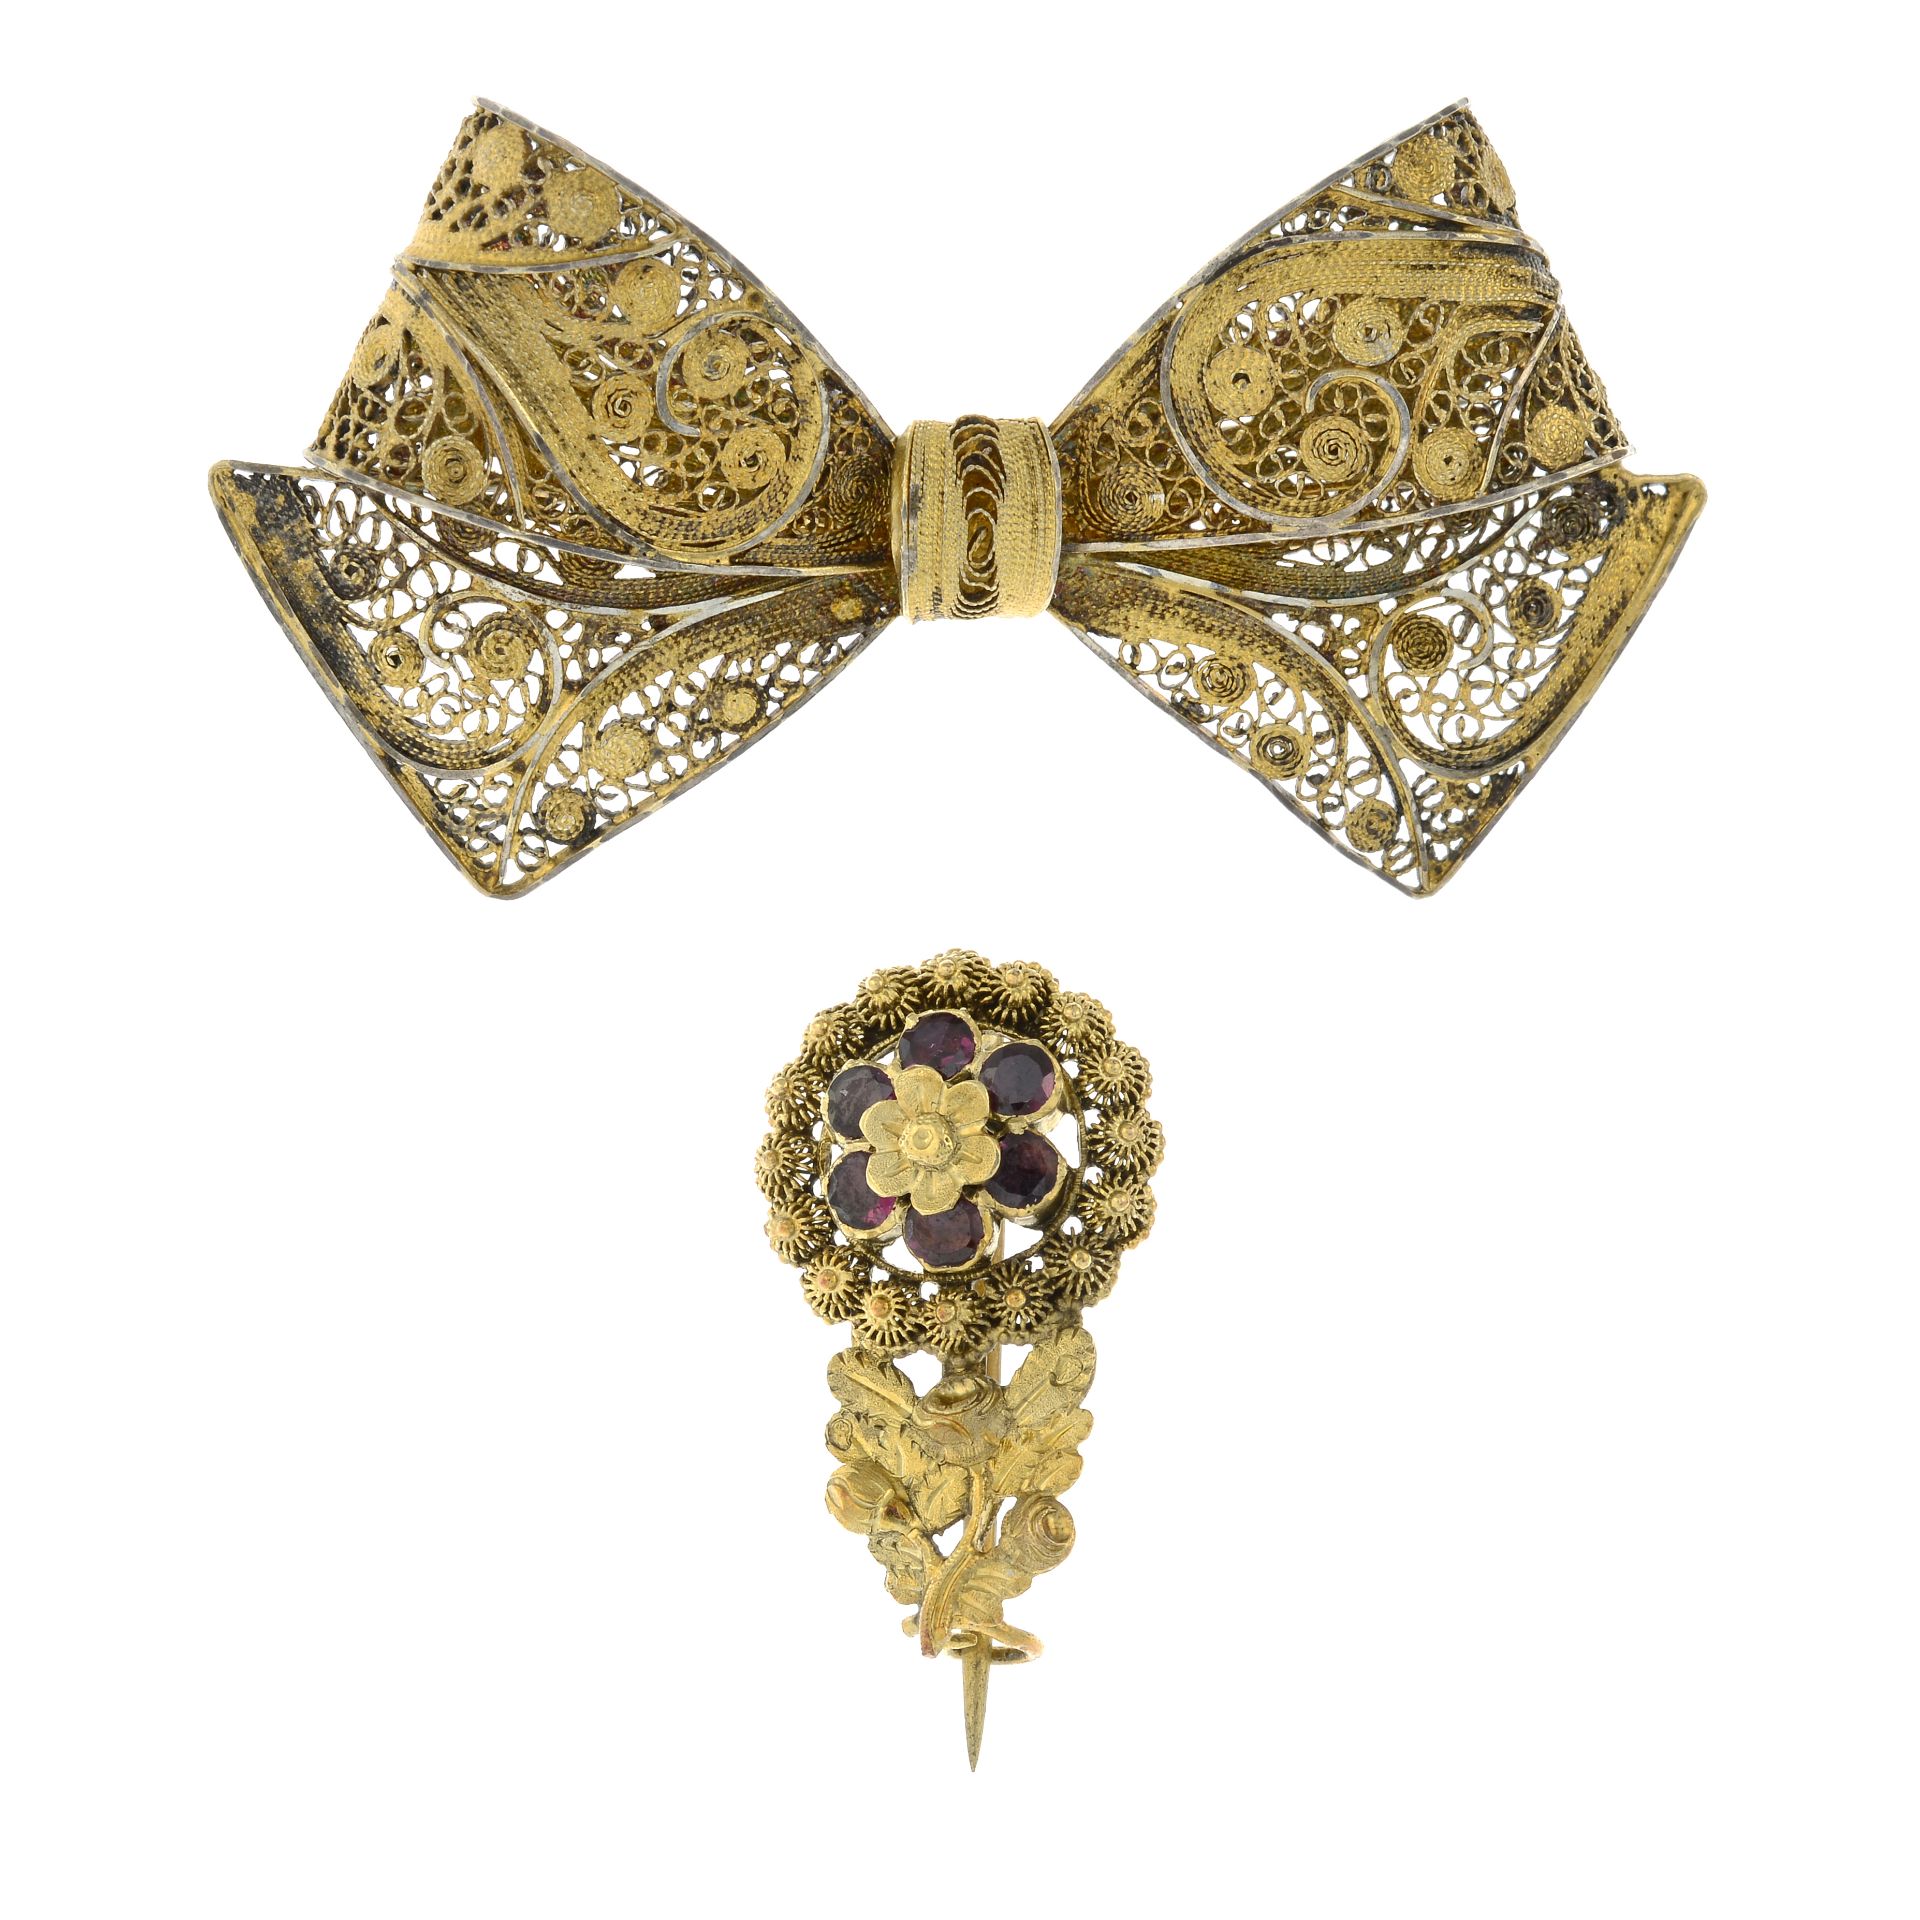 A 19th century gold garnet floral brooch and a silver gilt filigree bow brooch.